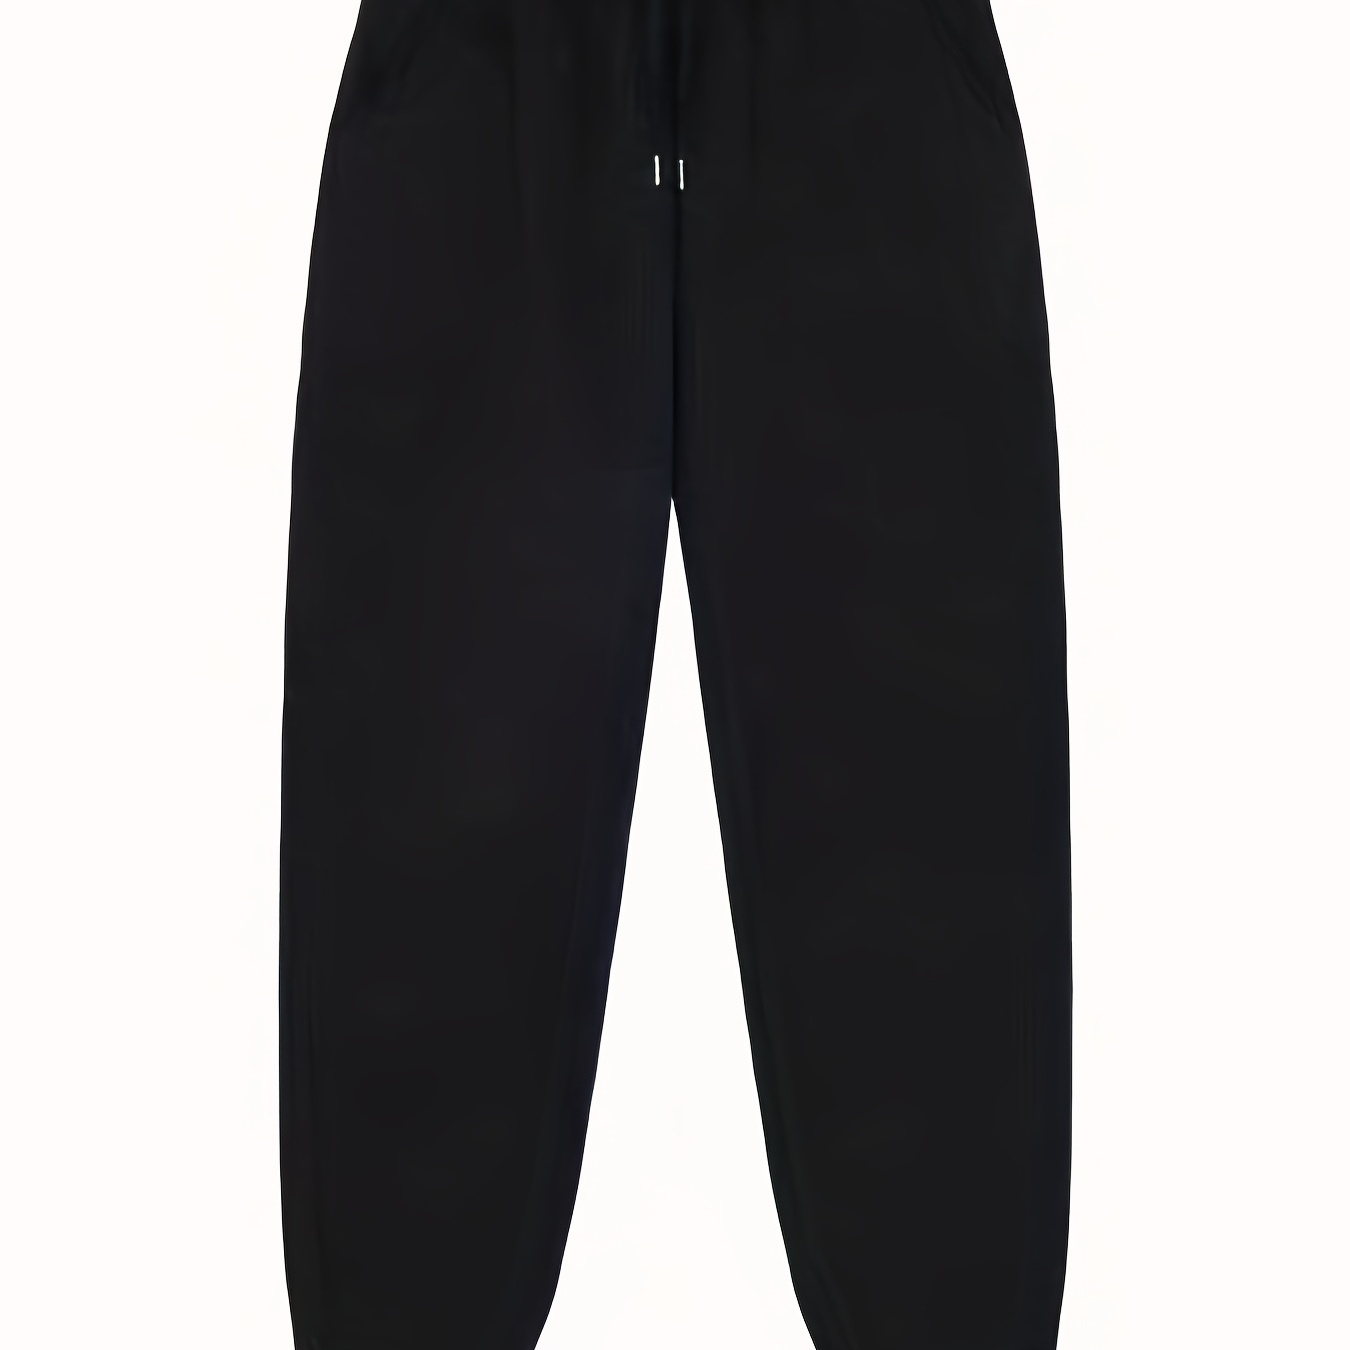 Classic Design Joggers, Men's Casual Loose Fit Slightly Stretch Waist Drawstring Pants For The 4 Seasons Fitness Cycling